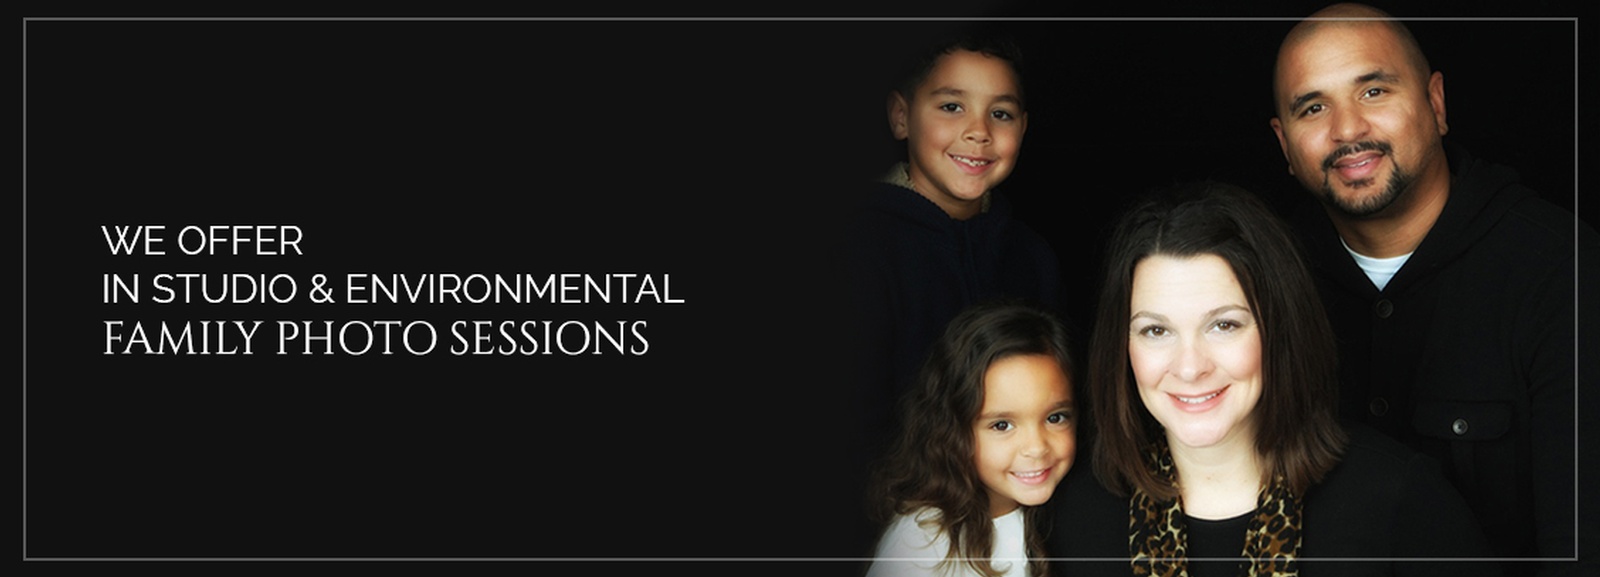 We Offer In Studio & Environmental Family Photo Sessions